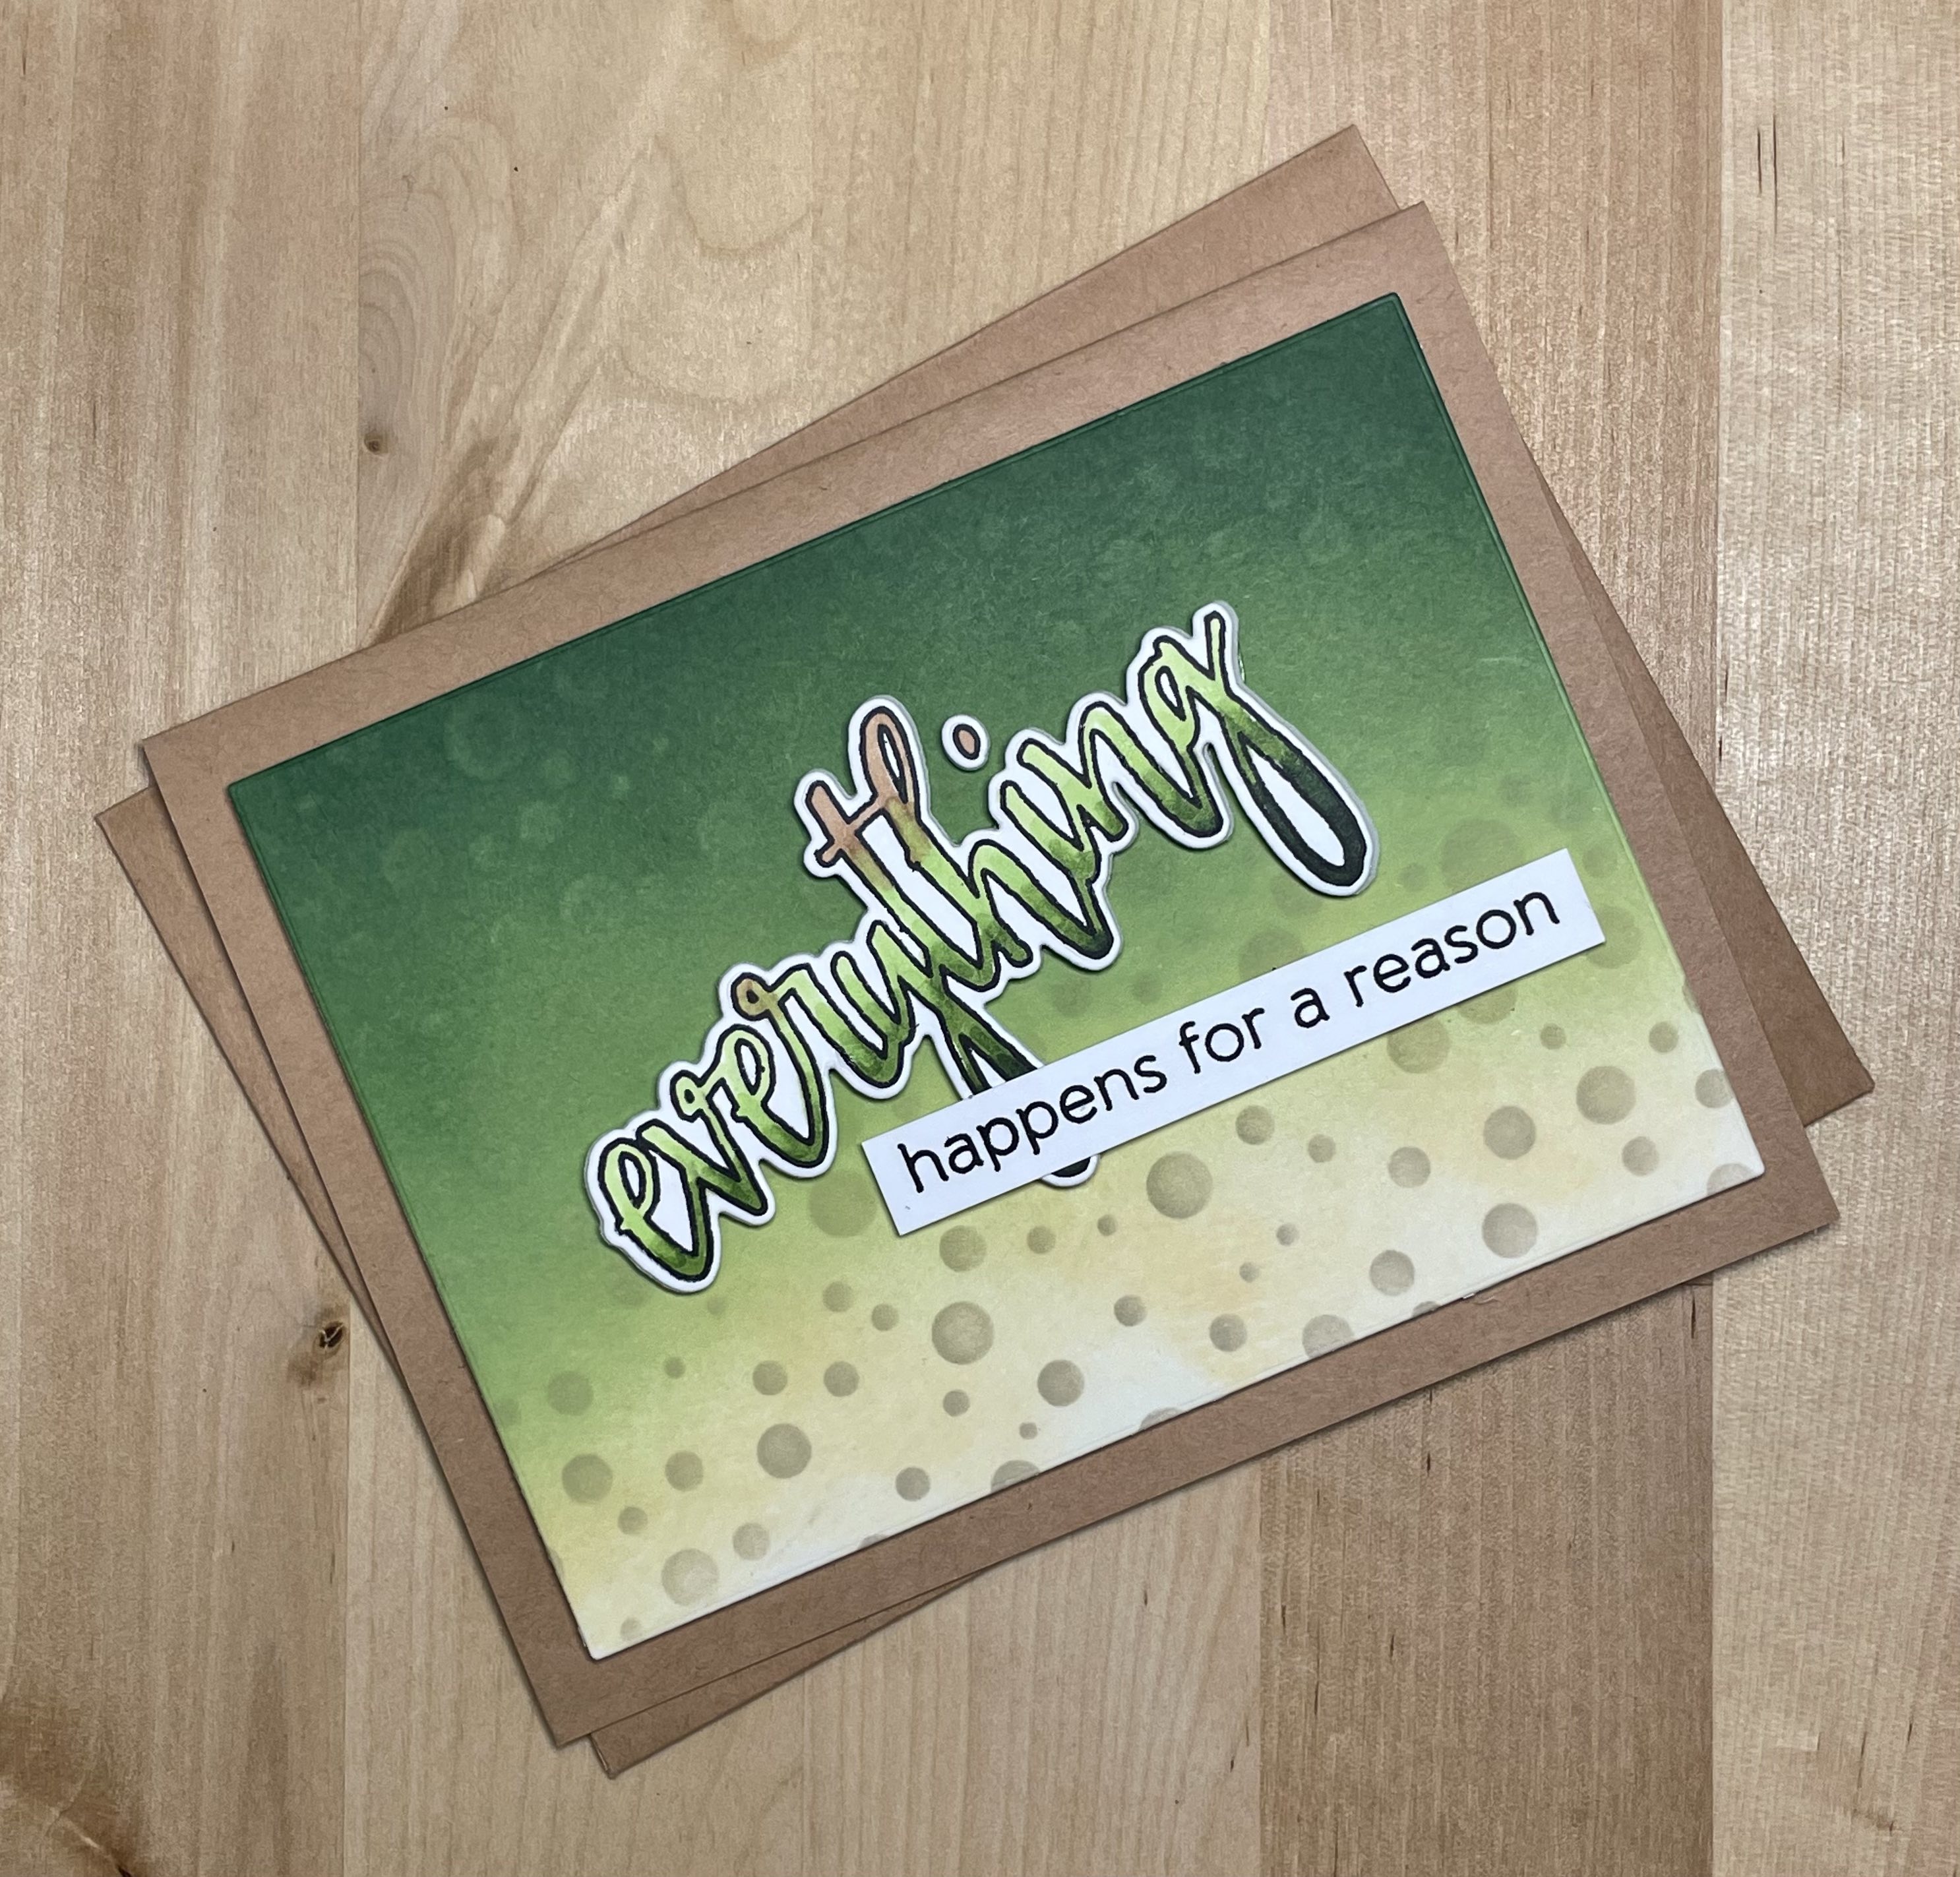 Fantastic masculine cards for encouragement with bass background and a sentiment that reads 'Everything happens for a reason